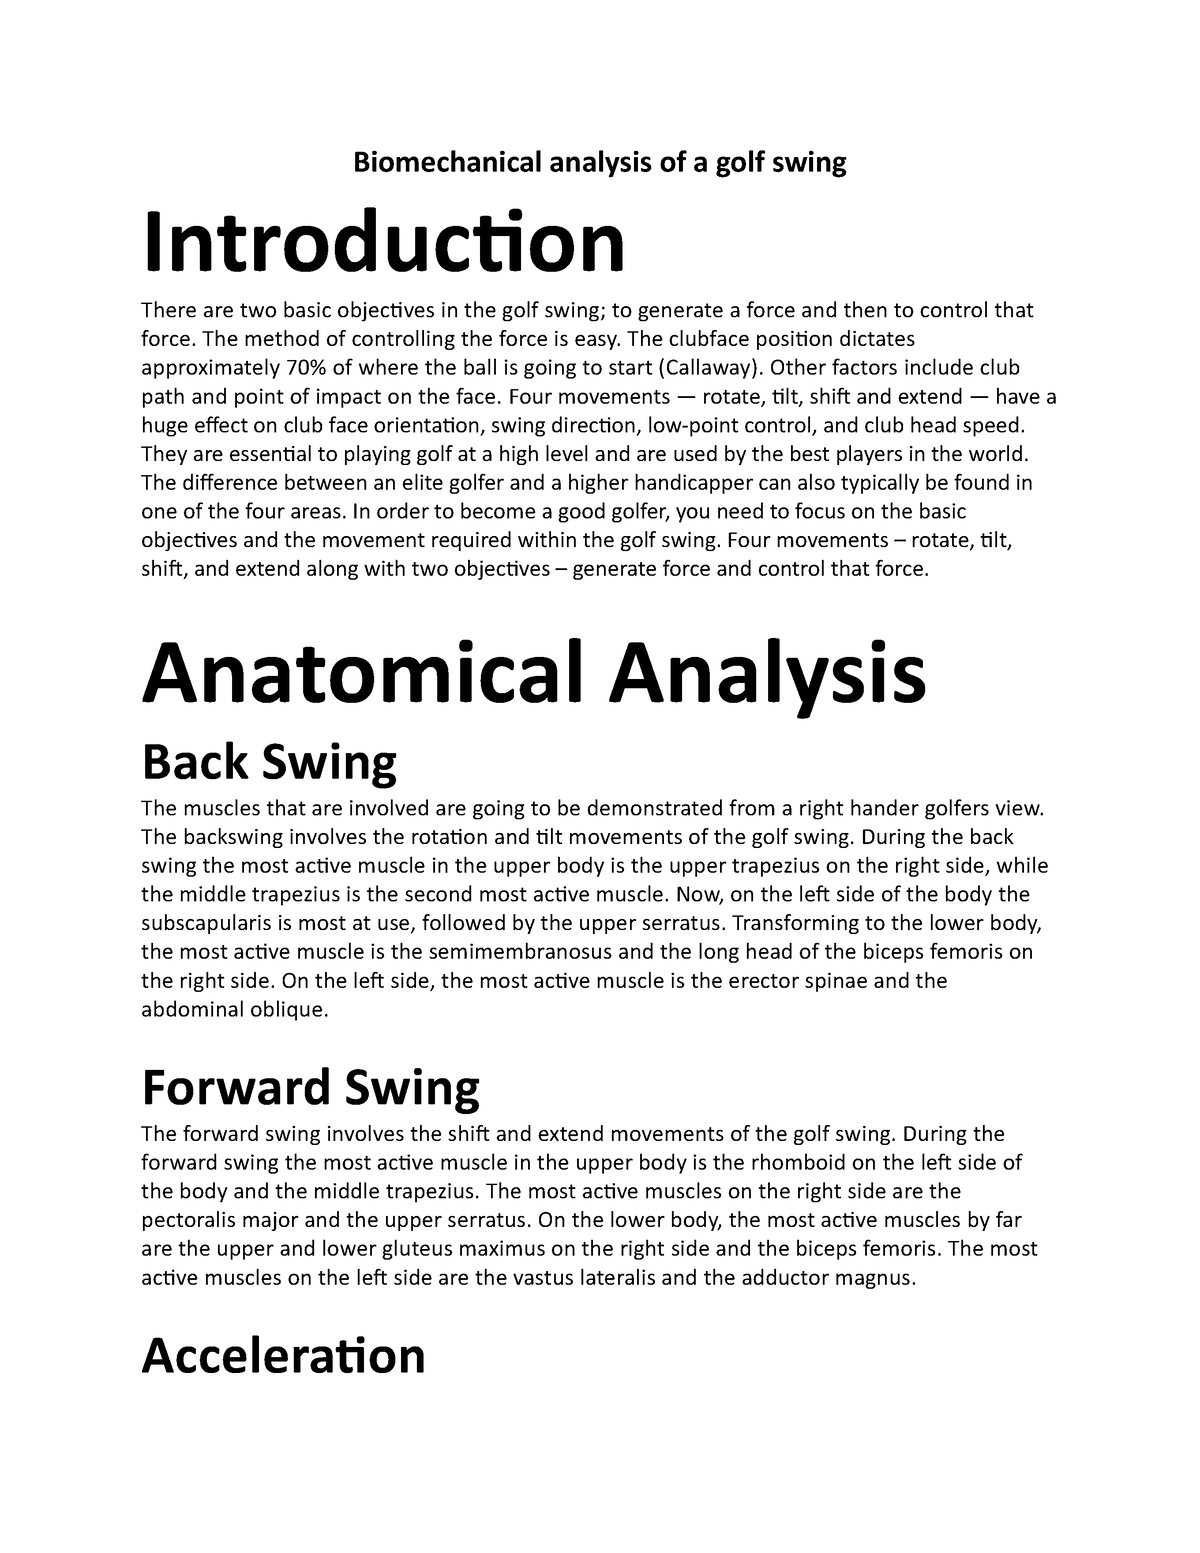 Biomechanical Project - Biomechanical analysis of a golf swing Introduction  There are two basic - Studocu